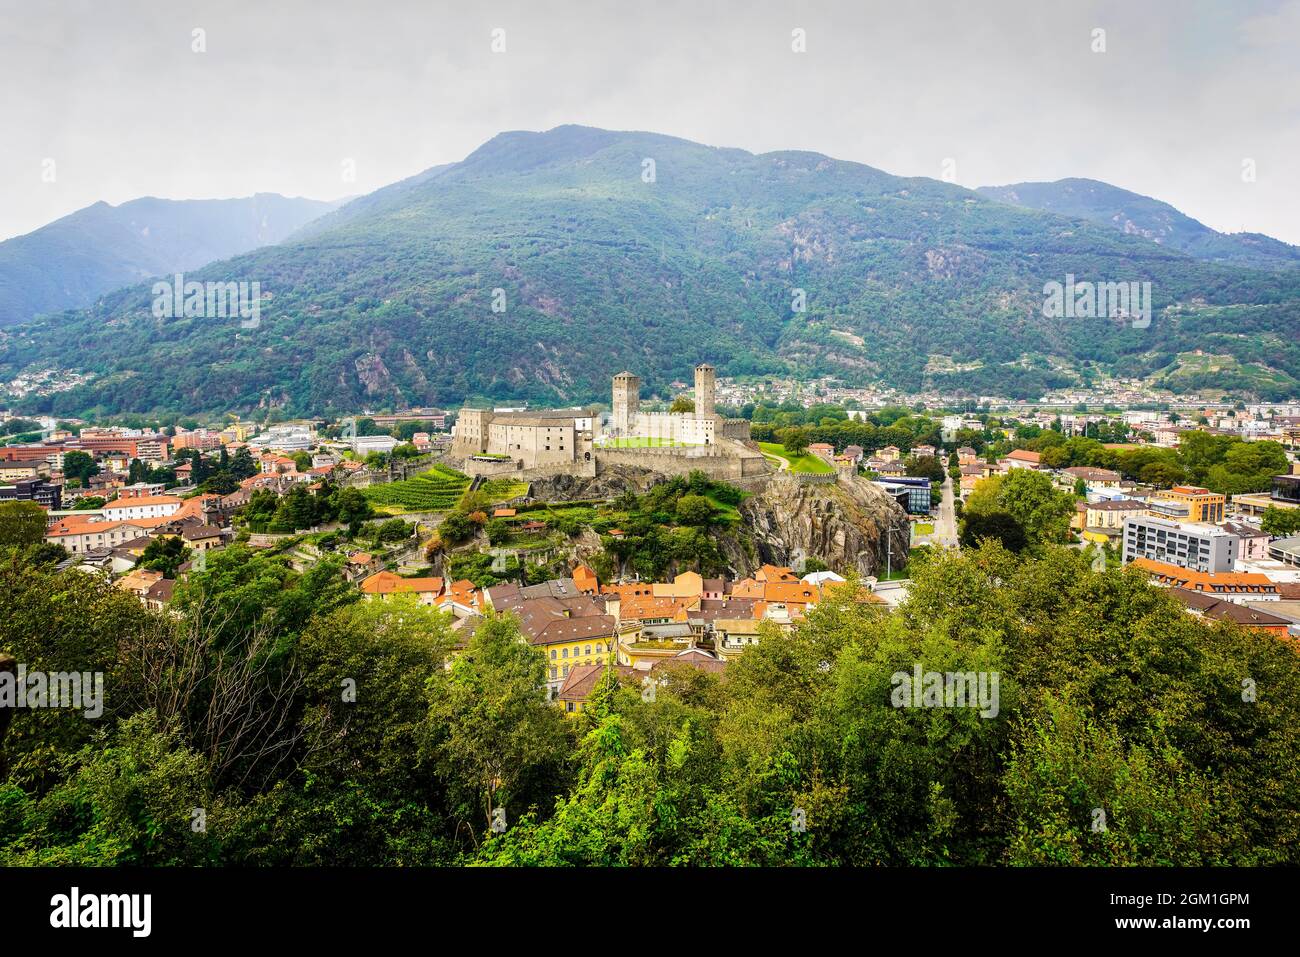 Panoramic view of Bellinzona Old Town and Castel Grande. Canton of Ticino, Switzerland. Bellinzona is a municipality, a historic Swiss town, and the c Stock Photo